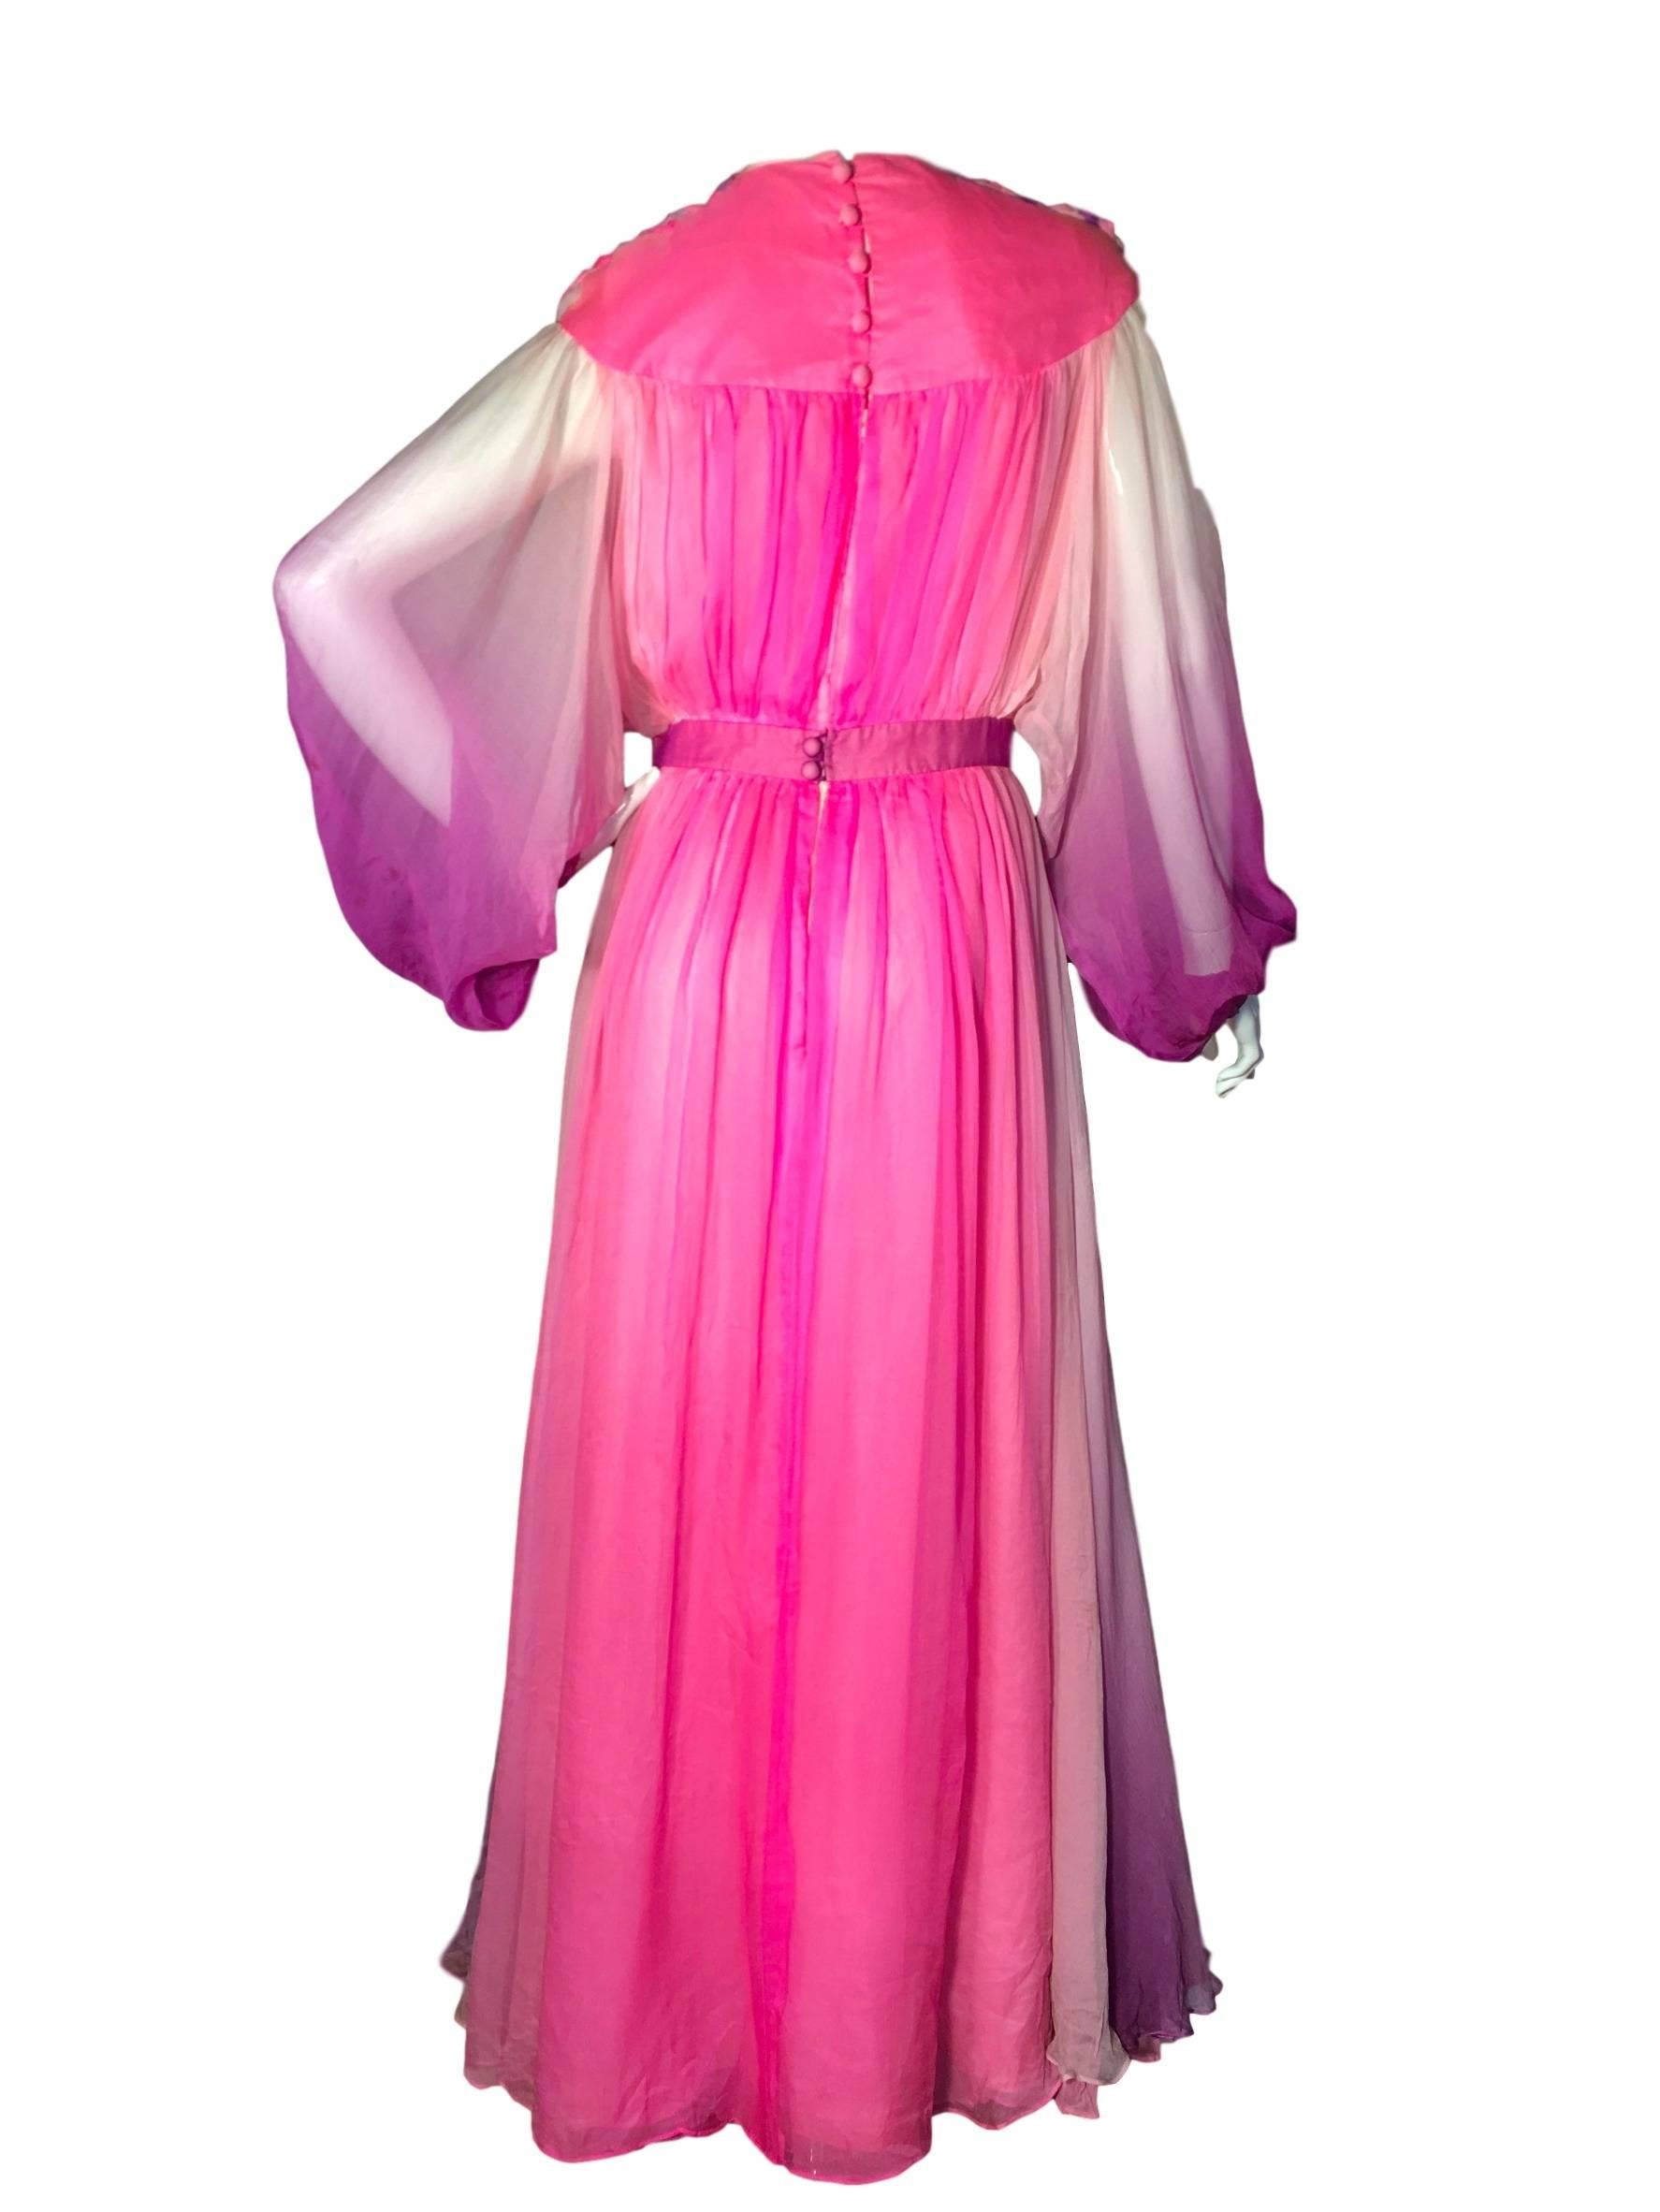 Norman Hartnell silk chiffon grecian maxi dress from the 1970s Ready To Wear range. This dress is made from silk chiffon with rayon lining, it is pink and purple with purposely colour fading/transitioning effect to it. The shoulders have plaited